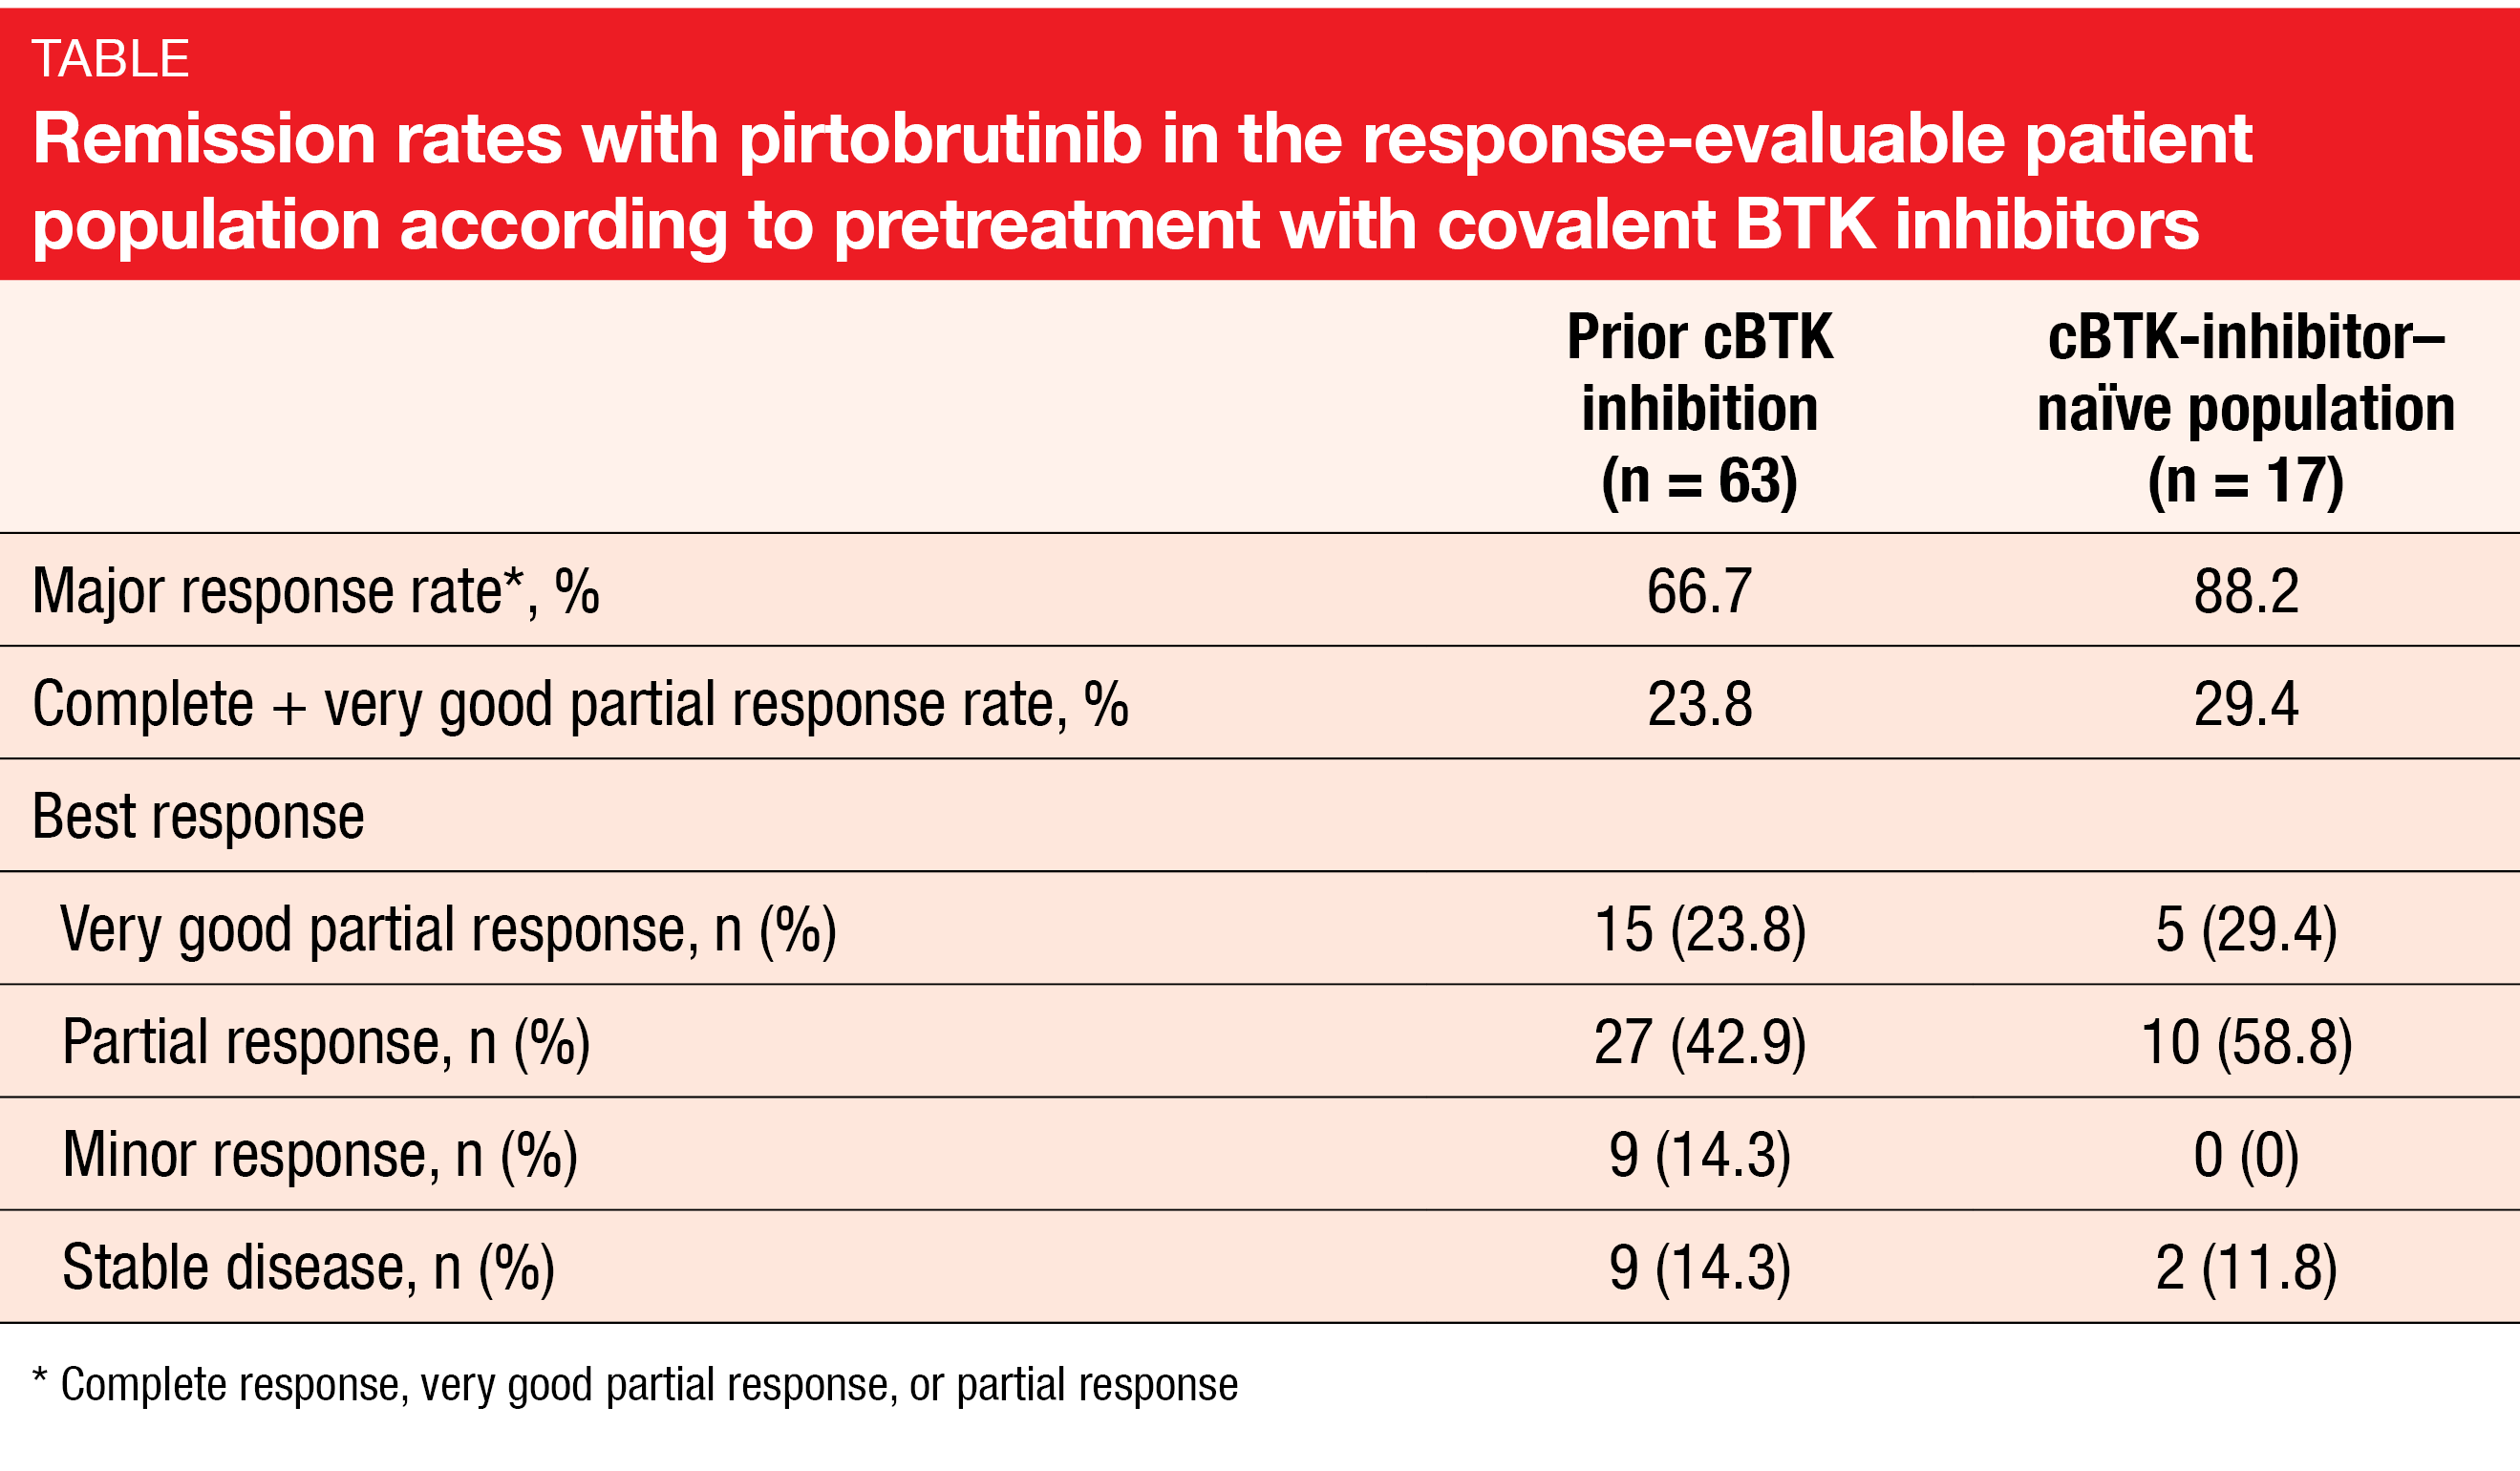 Table Remission rates with pirtobrutinib in the response-evaluable patient population according to pretreatment with covalent BTK inhibitors